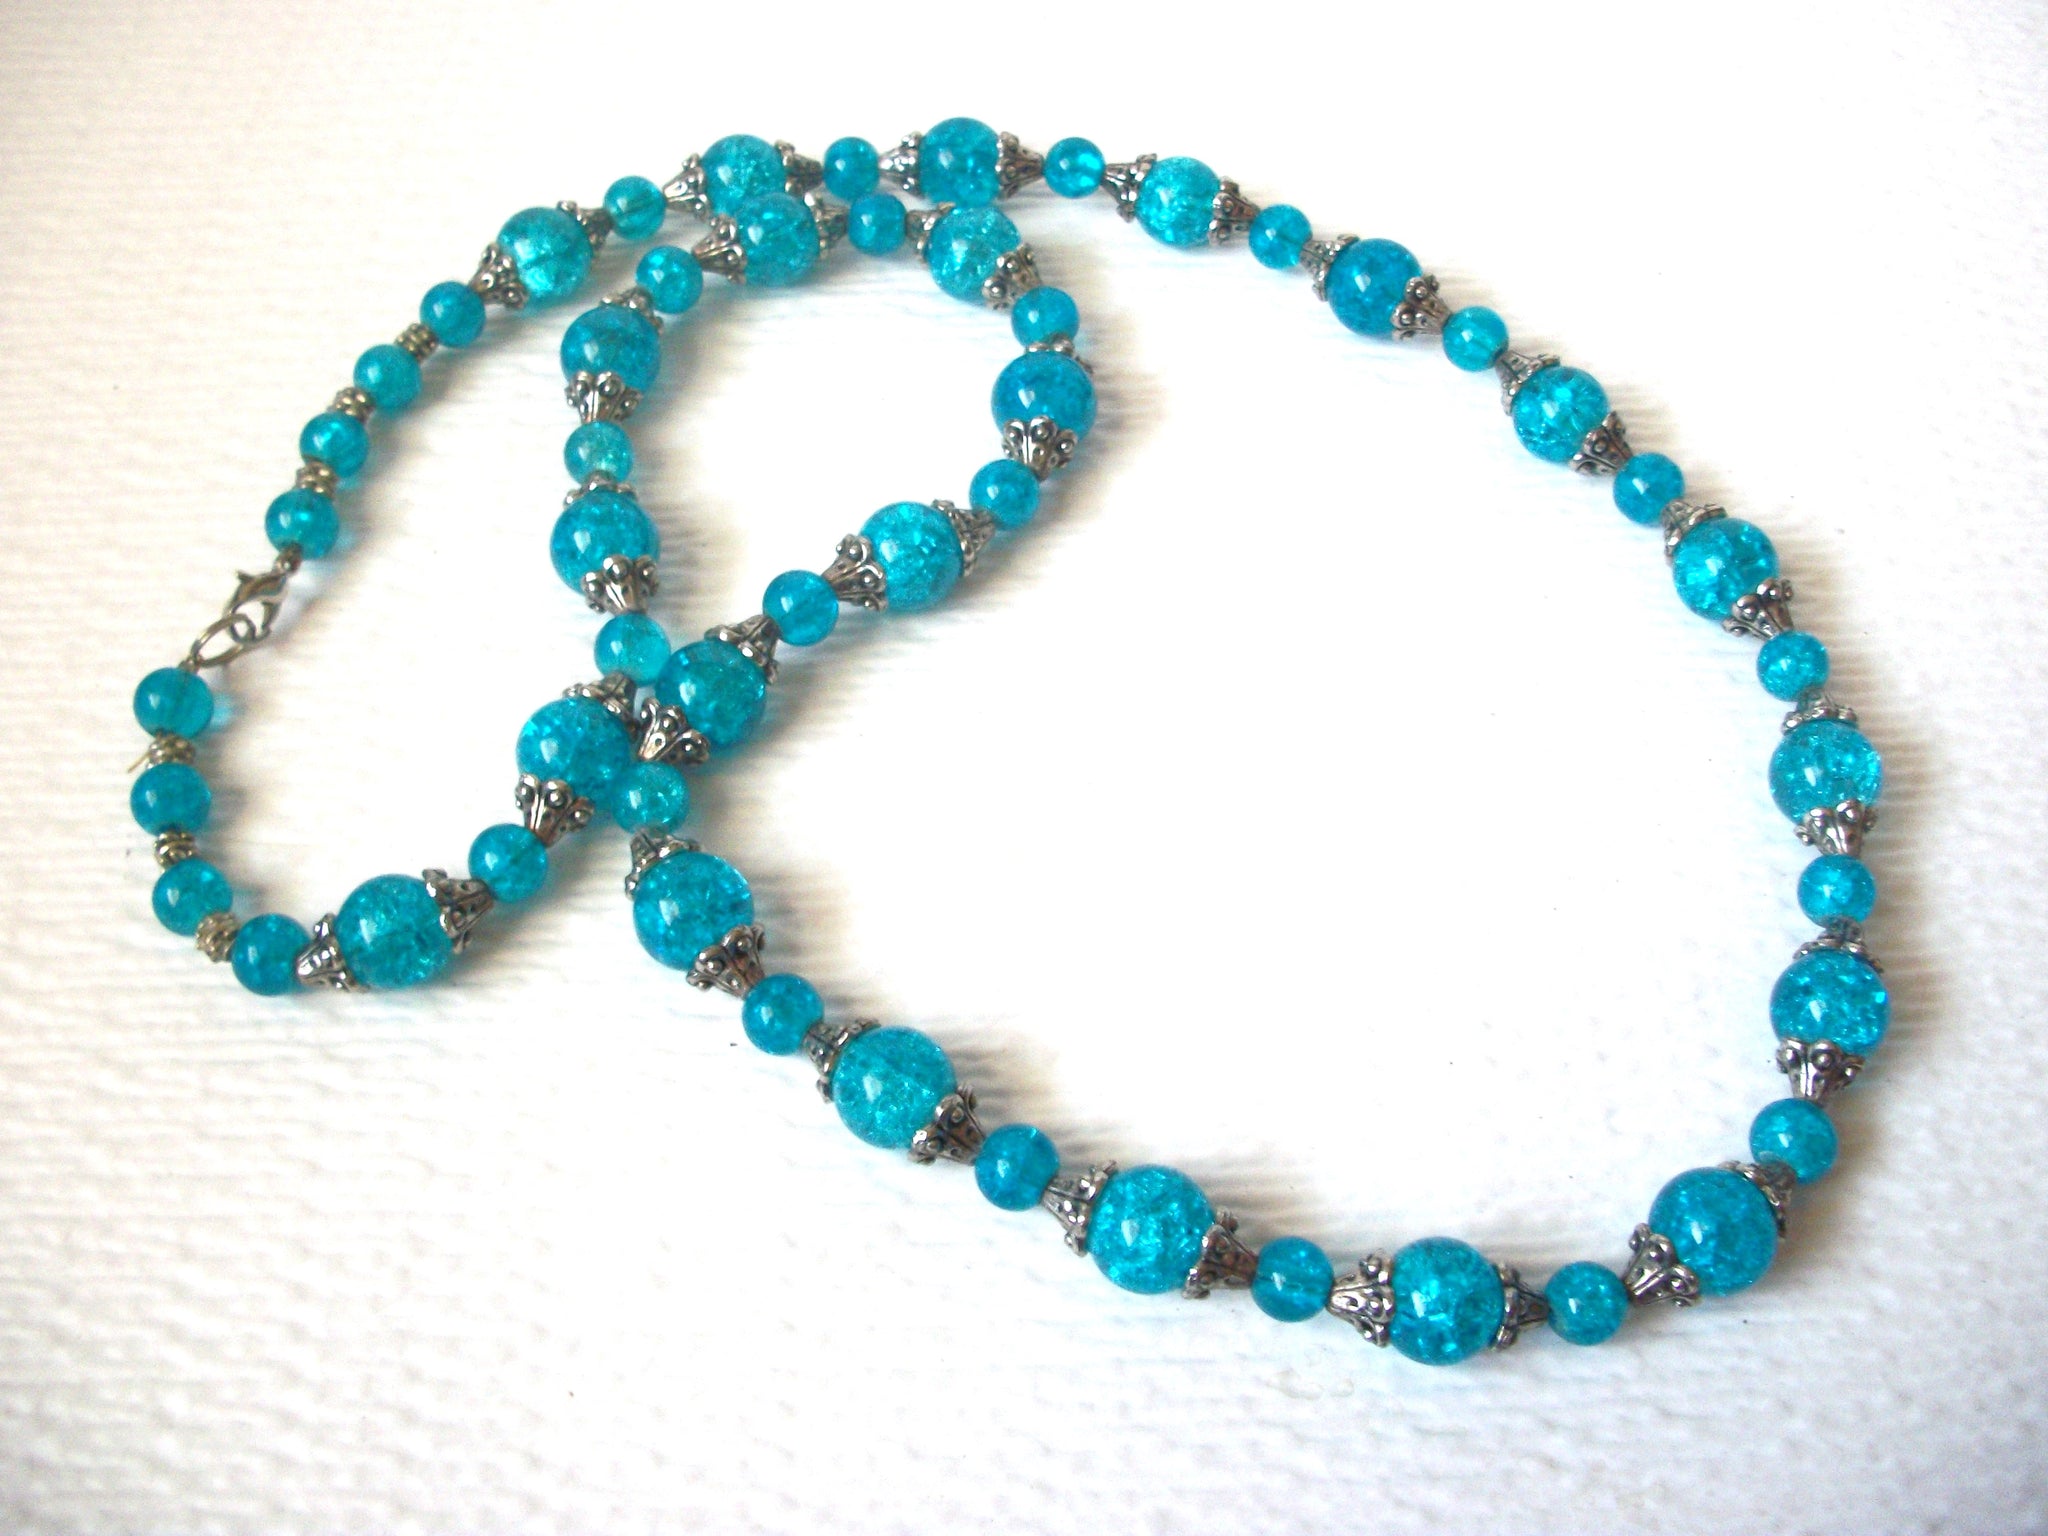 Long Blue Crackle Glass Beaded Necklace 121120